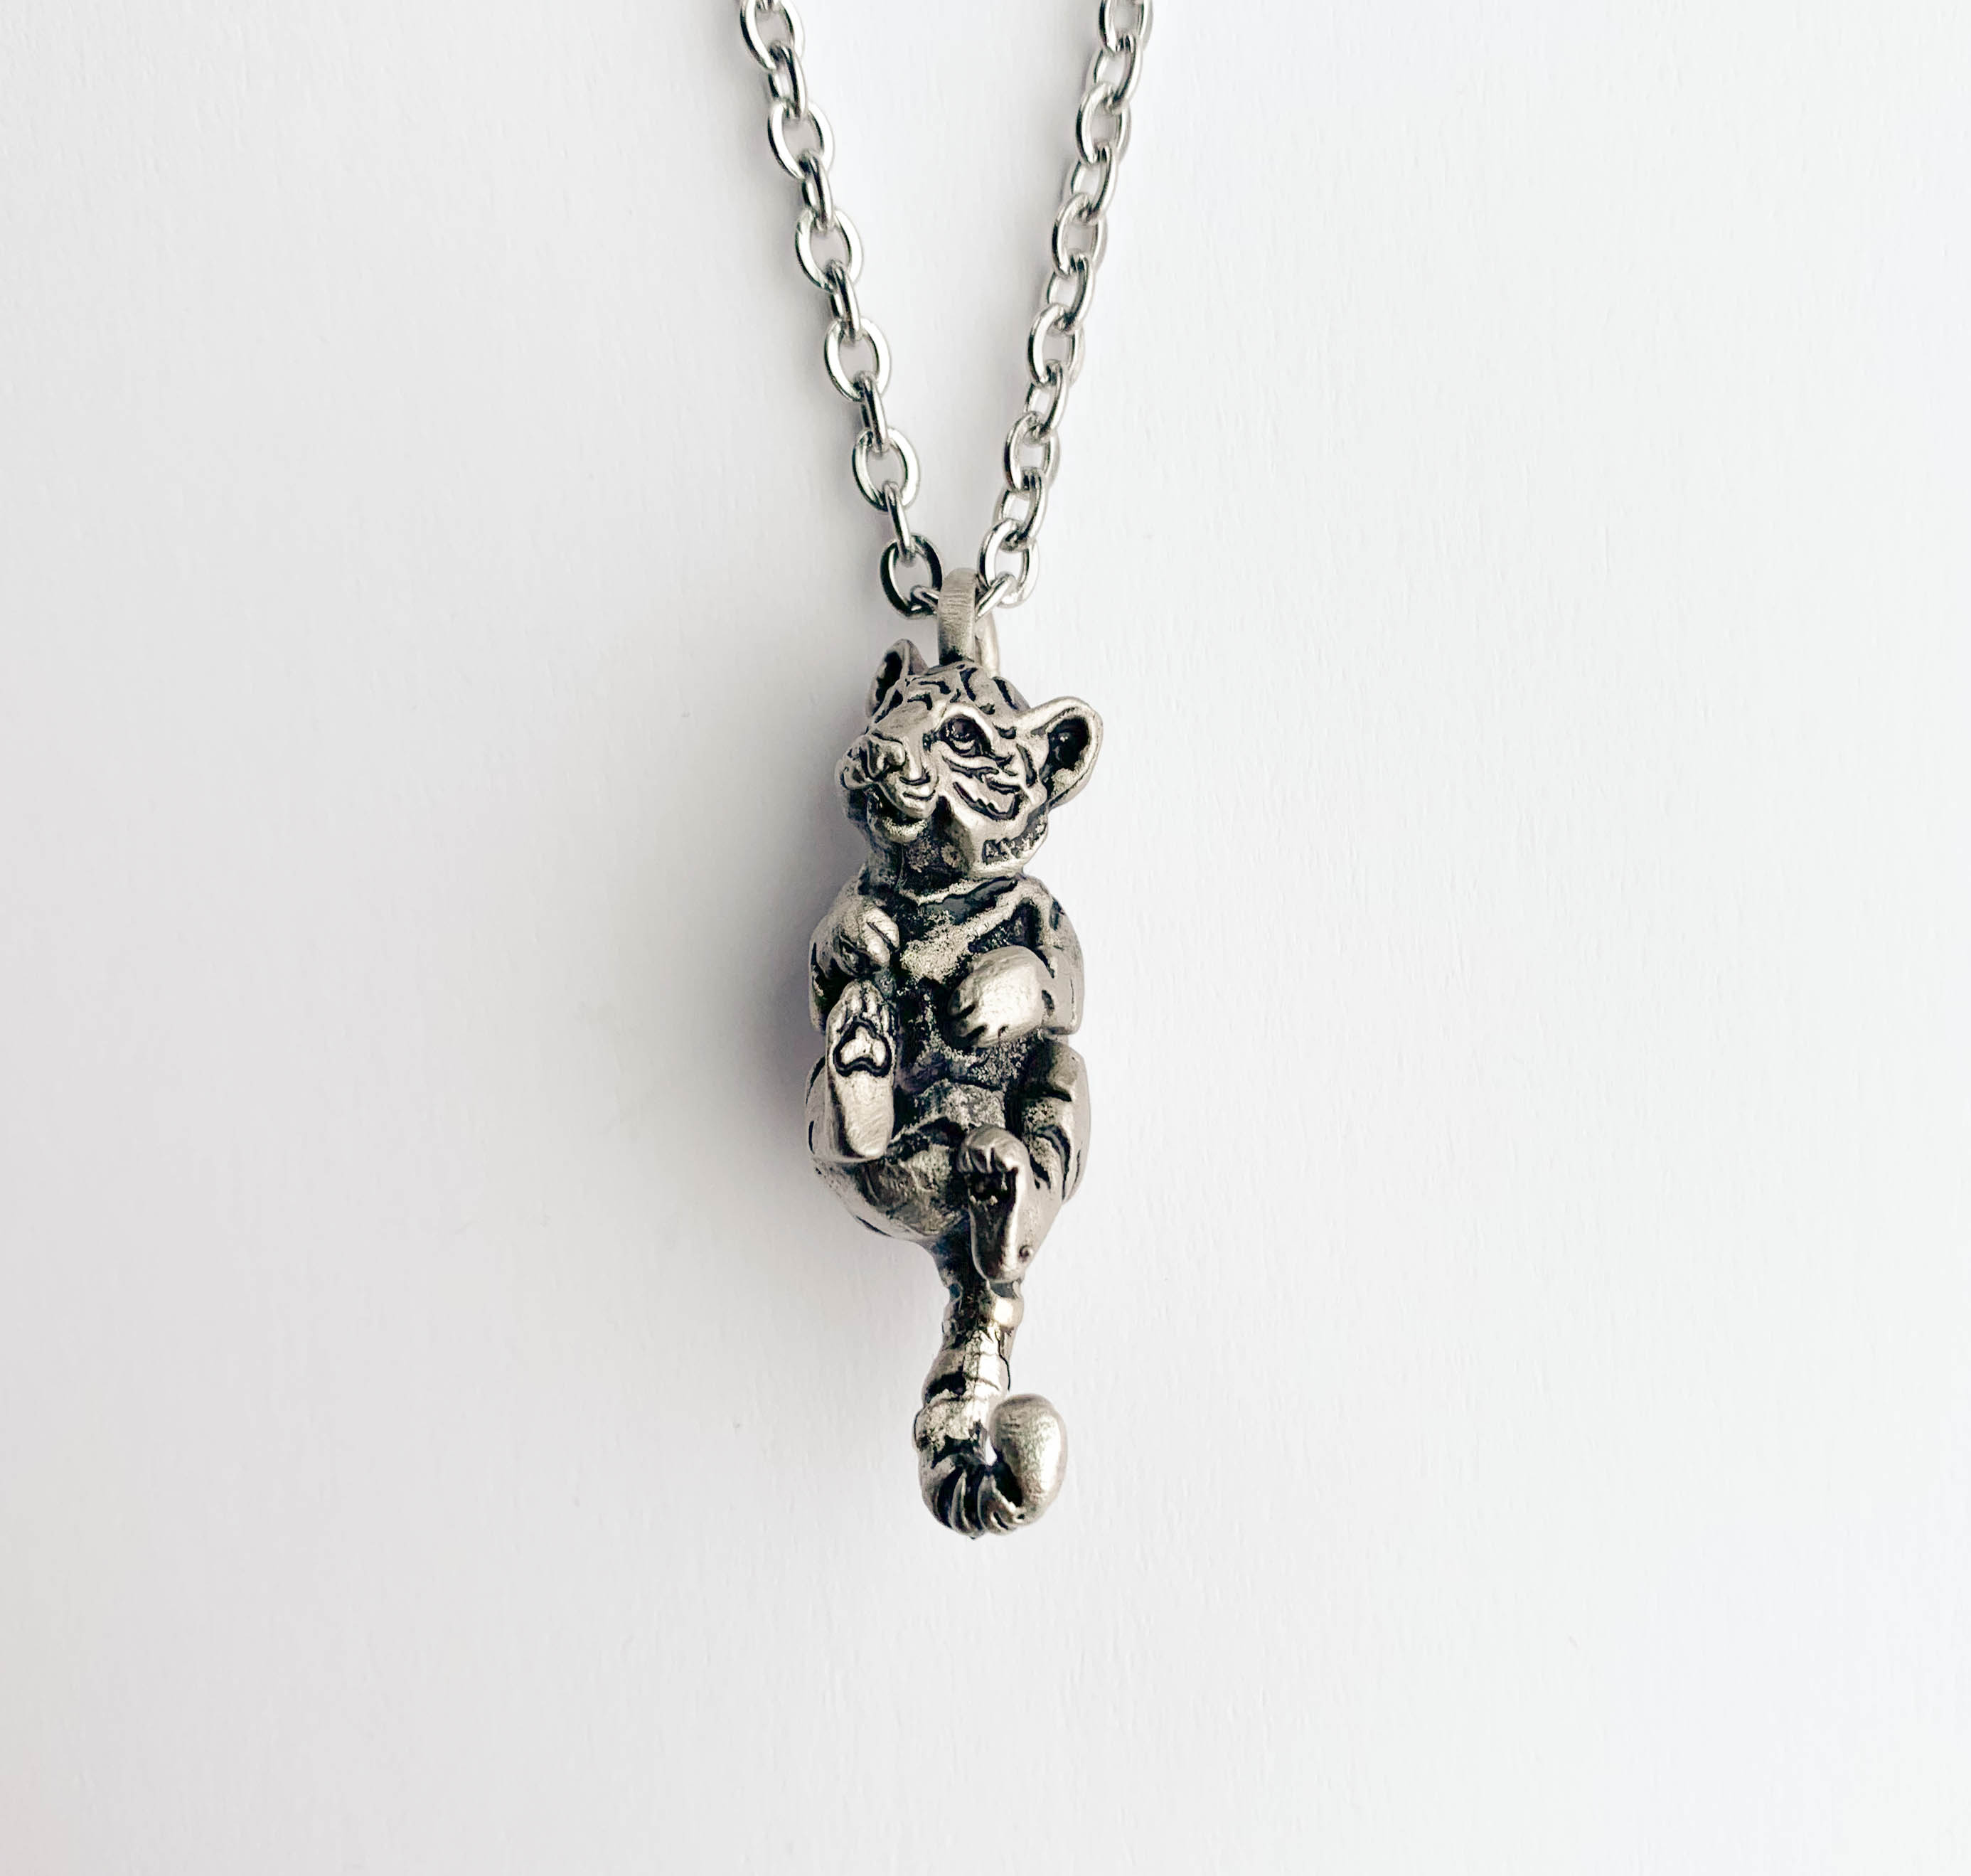 Pewter Tiger Cub Necklace